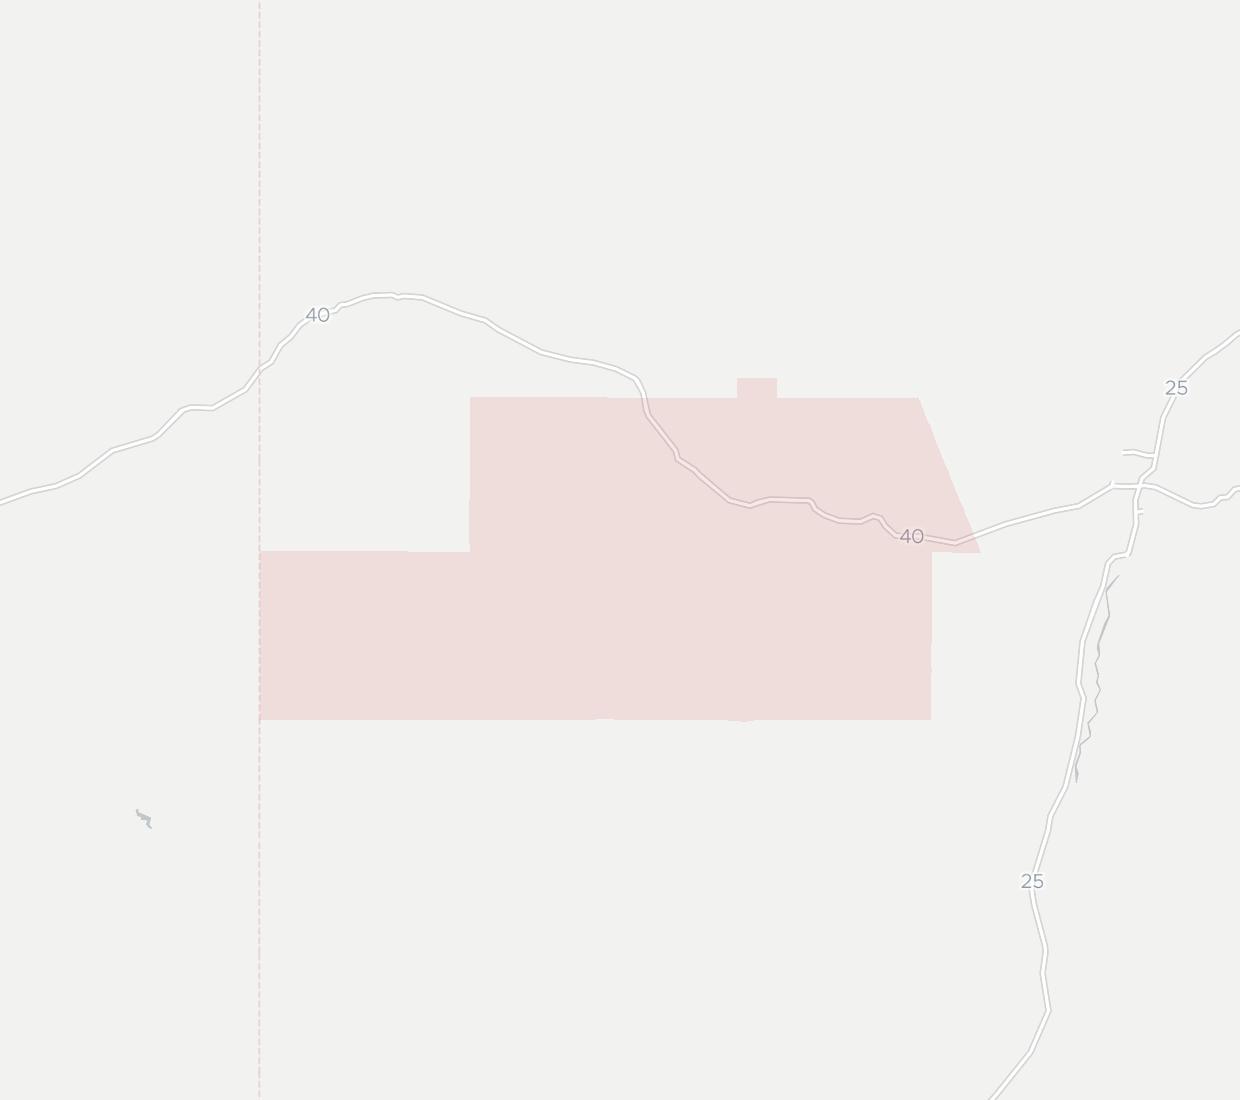 Continental Divide Electric Cooperative Coverage Map